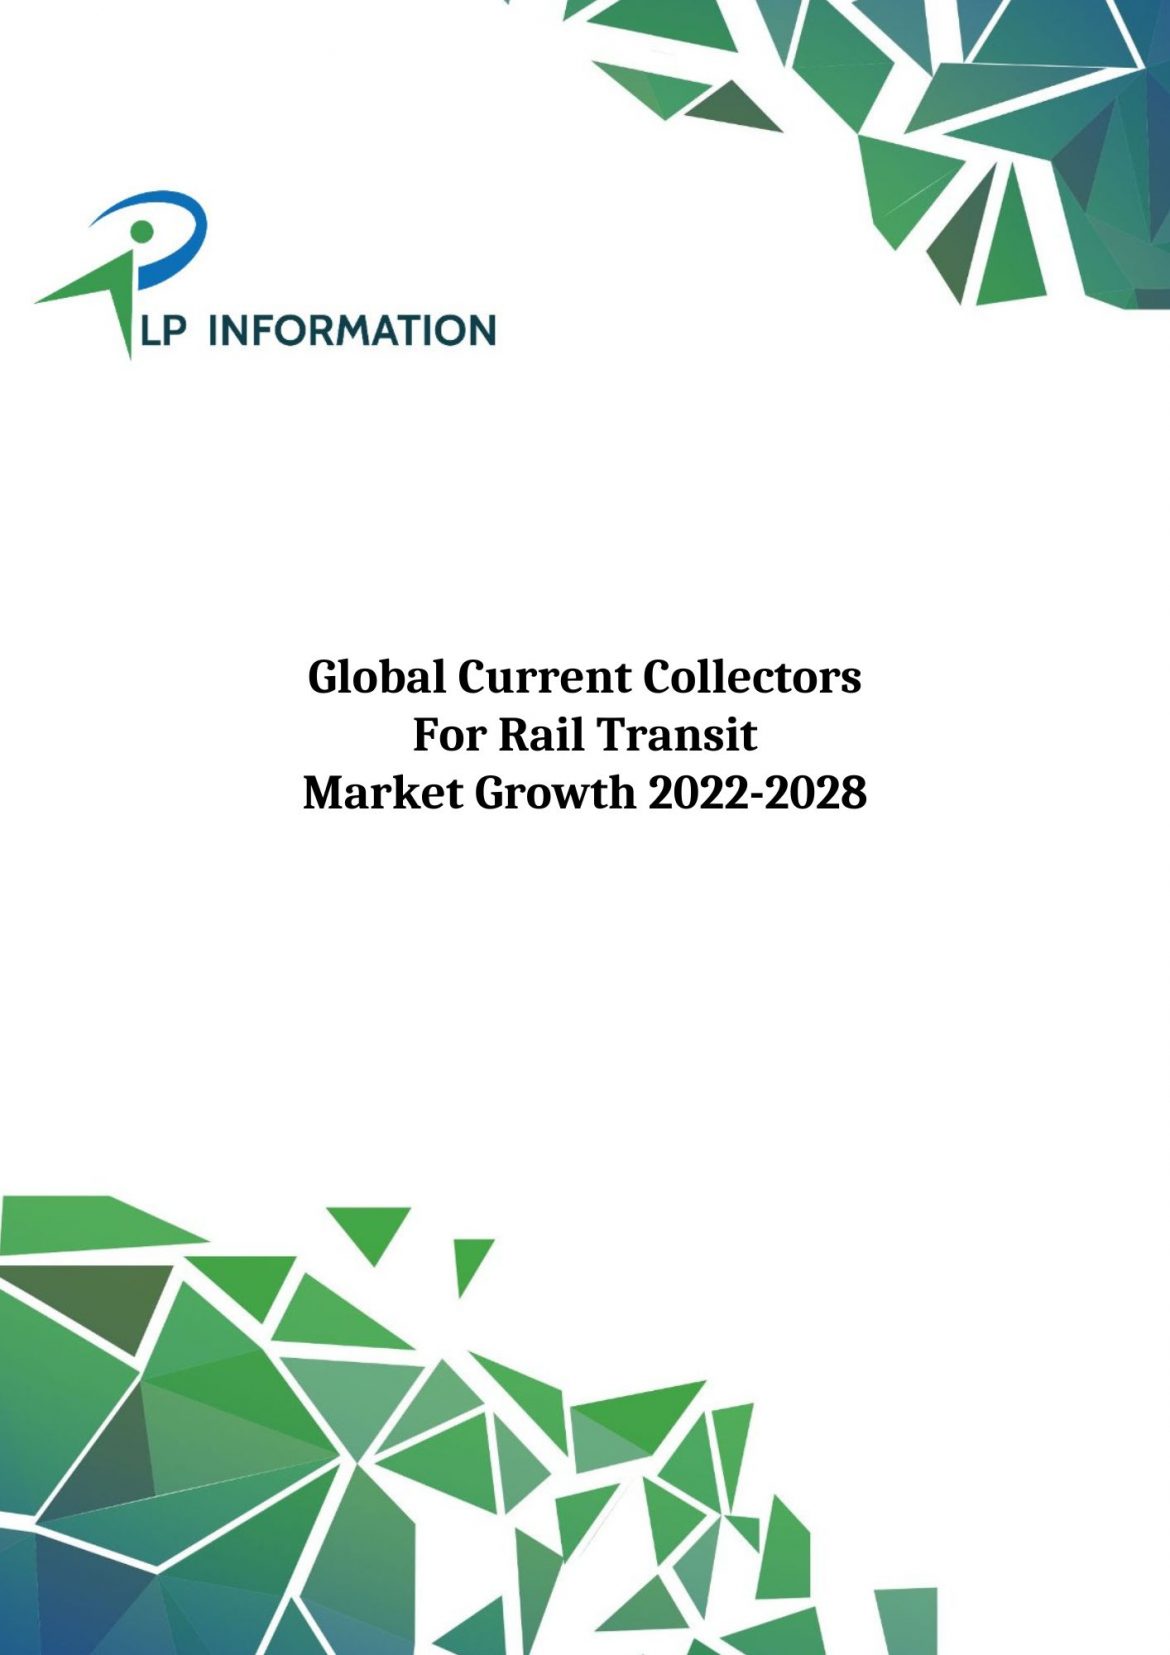 Global Current Collectors For Rail Transit Market Growth 2022-2028